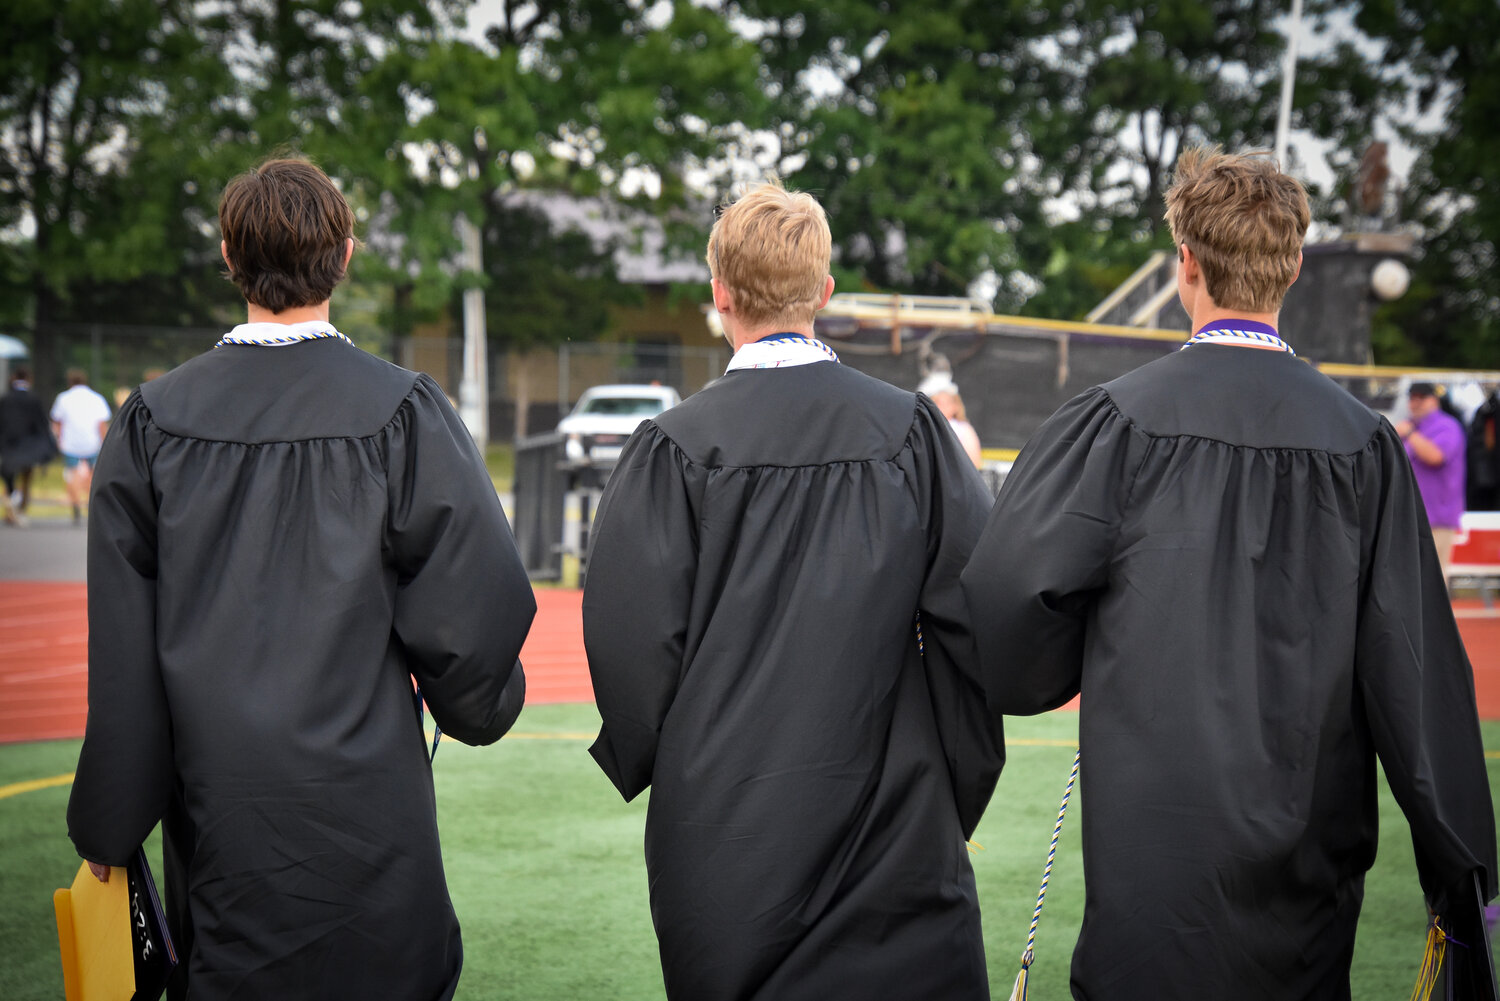 That’s a wrap. Three Palisades High School seniors head depart the Walter T. Rohrer Stadium on June 2 at the end of their graduation ceremony.